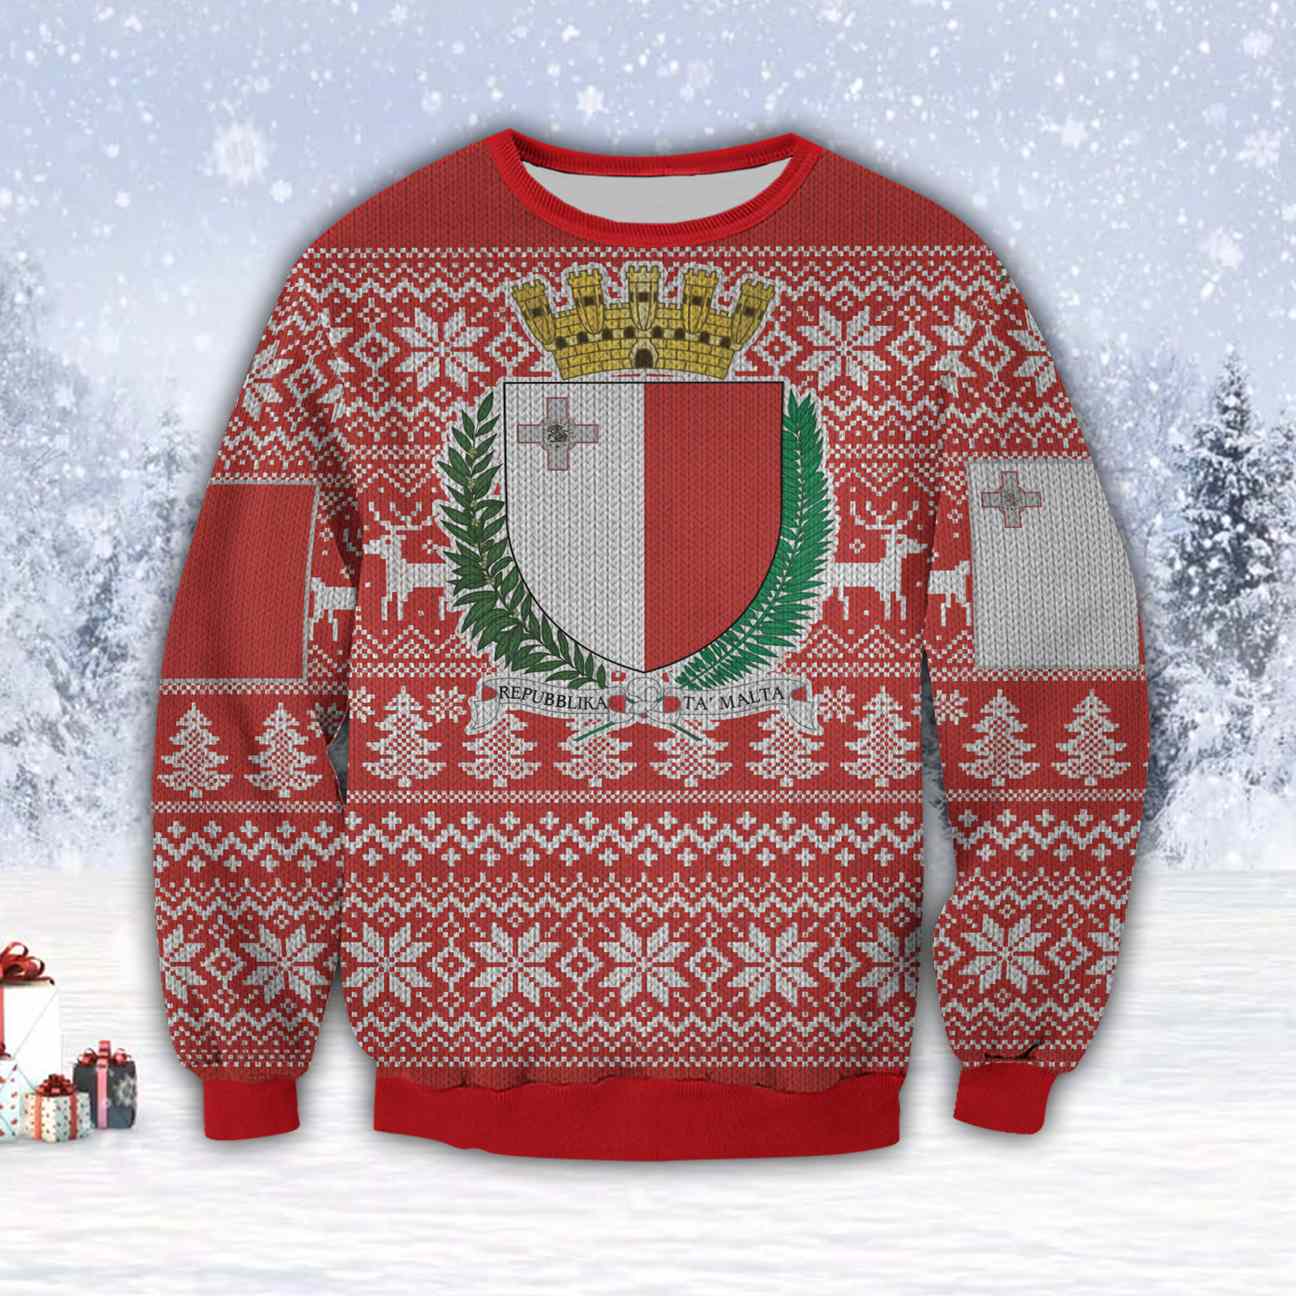 Malta Island Country 3D All Over Print Ugly Christmas Sweater Hoodie All Over Printed Cint10365